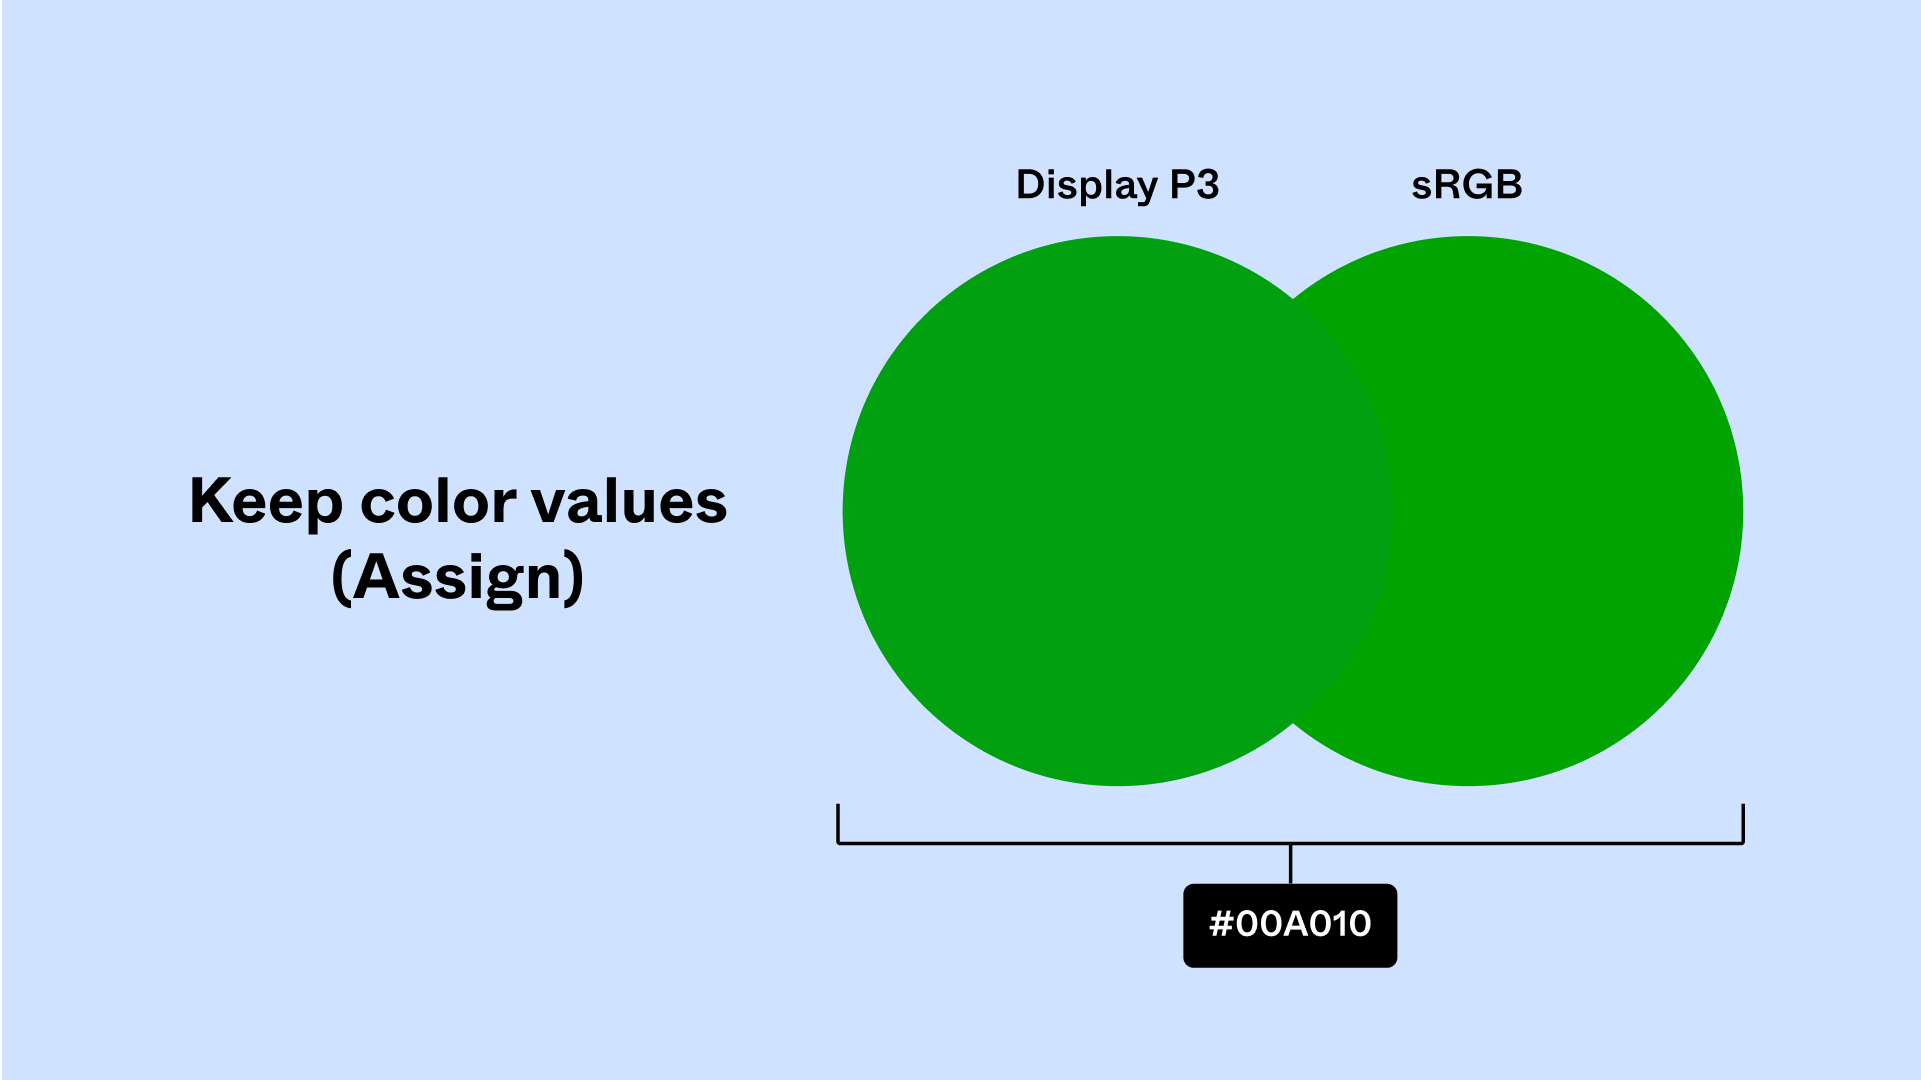 On the left is a title that says Keep color values (Assign). On the right are two circles with slightly different green colors, one labelled Display P3, one labelled sRGB. Both circles labelled with the same hex code #00A010